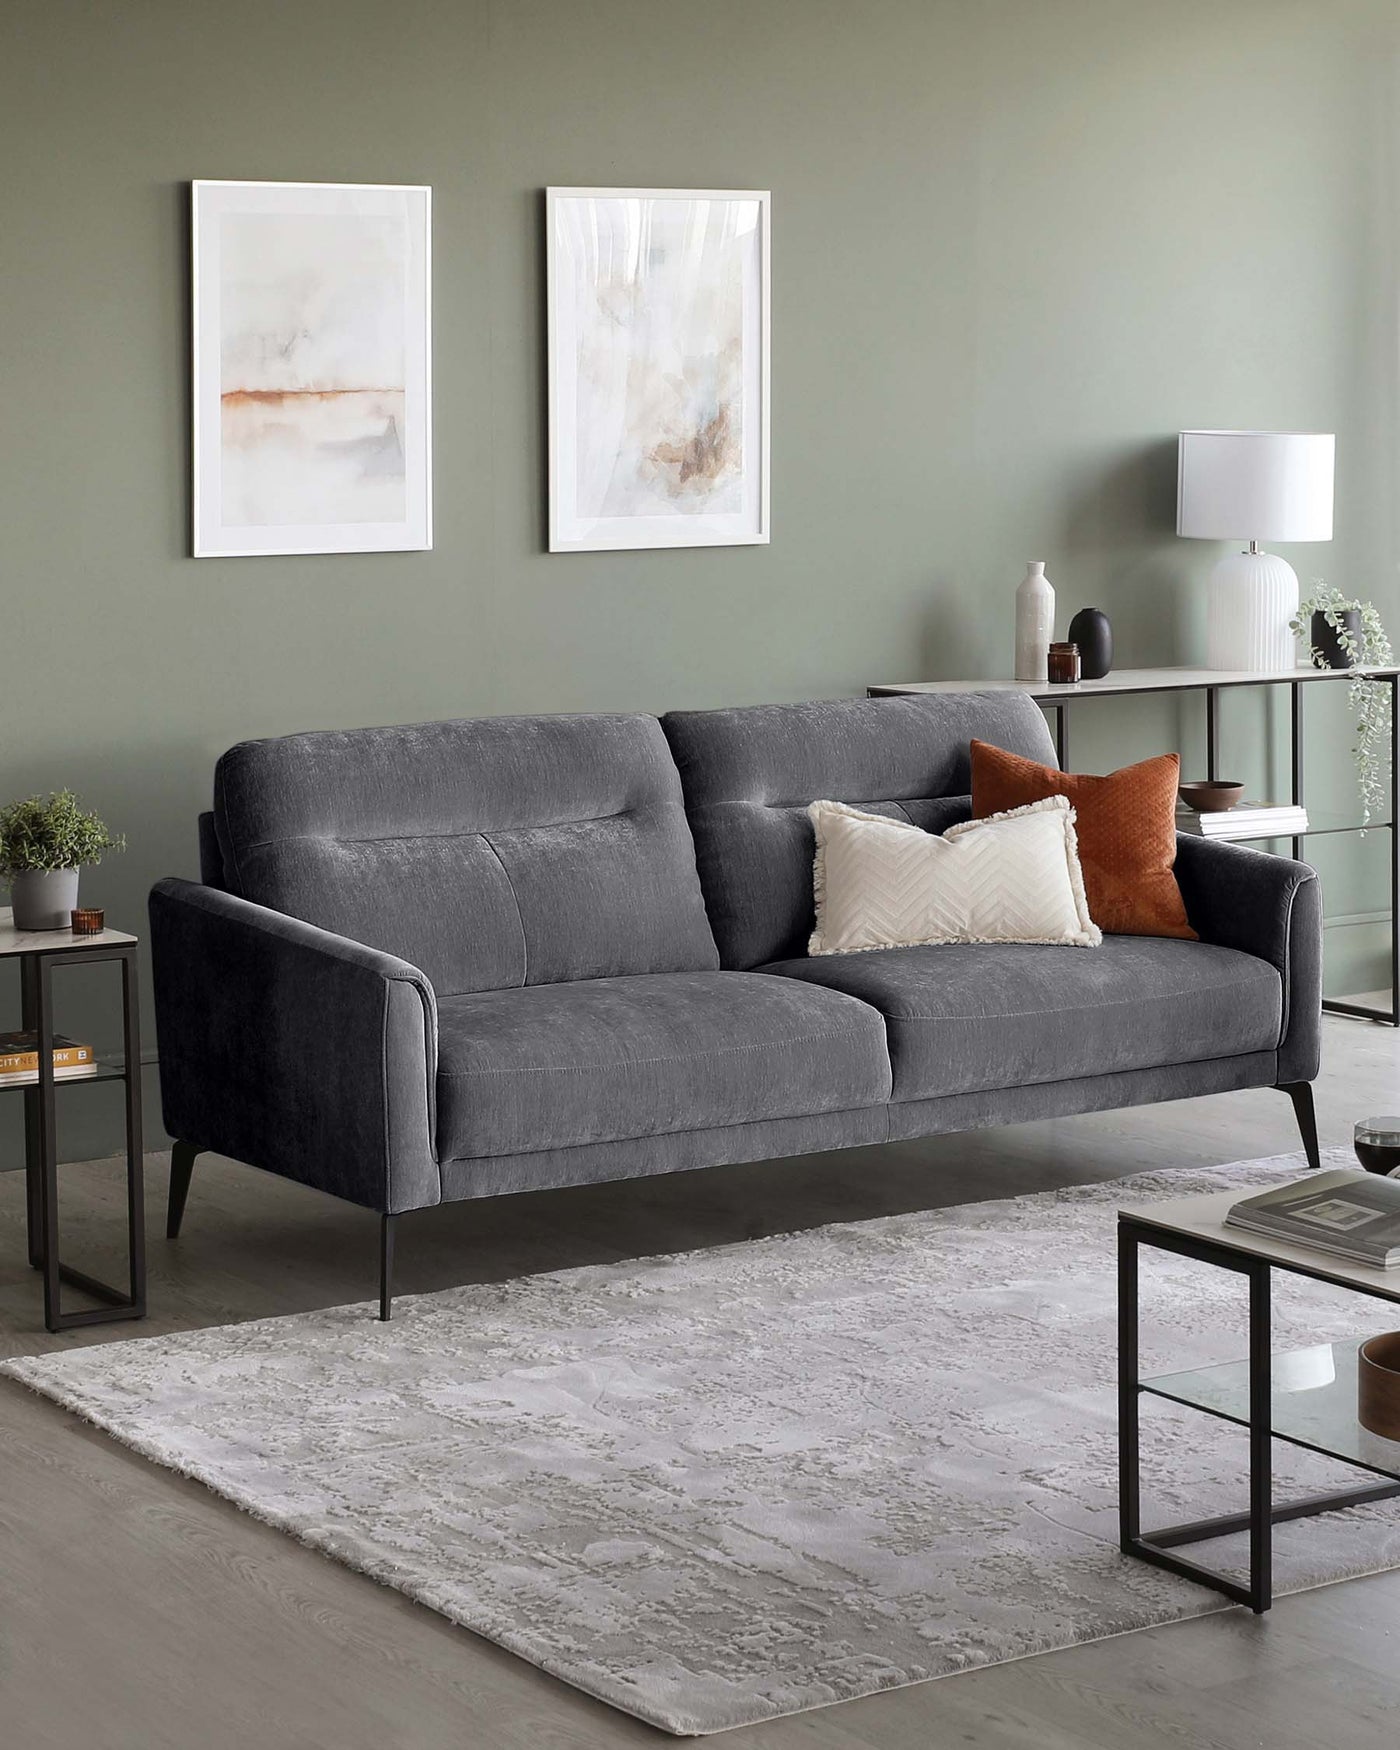 A modern charcoal grey fabric sofa with two seat cushions and black metal legs, complemented by a mix of white and burnt orange throw pillows. In front of the sofa is a light grey patterned area rug. To the side, there is a black metal frame side table with a simple, rectangular design, topped with a small potted plant and books. Another matching table is partially visible, featuring decorative items and books.